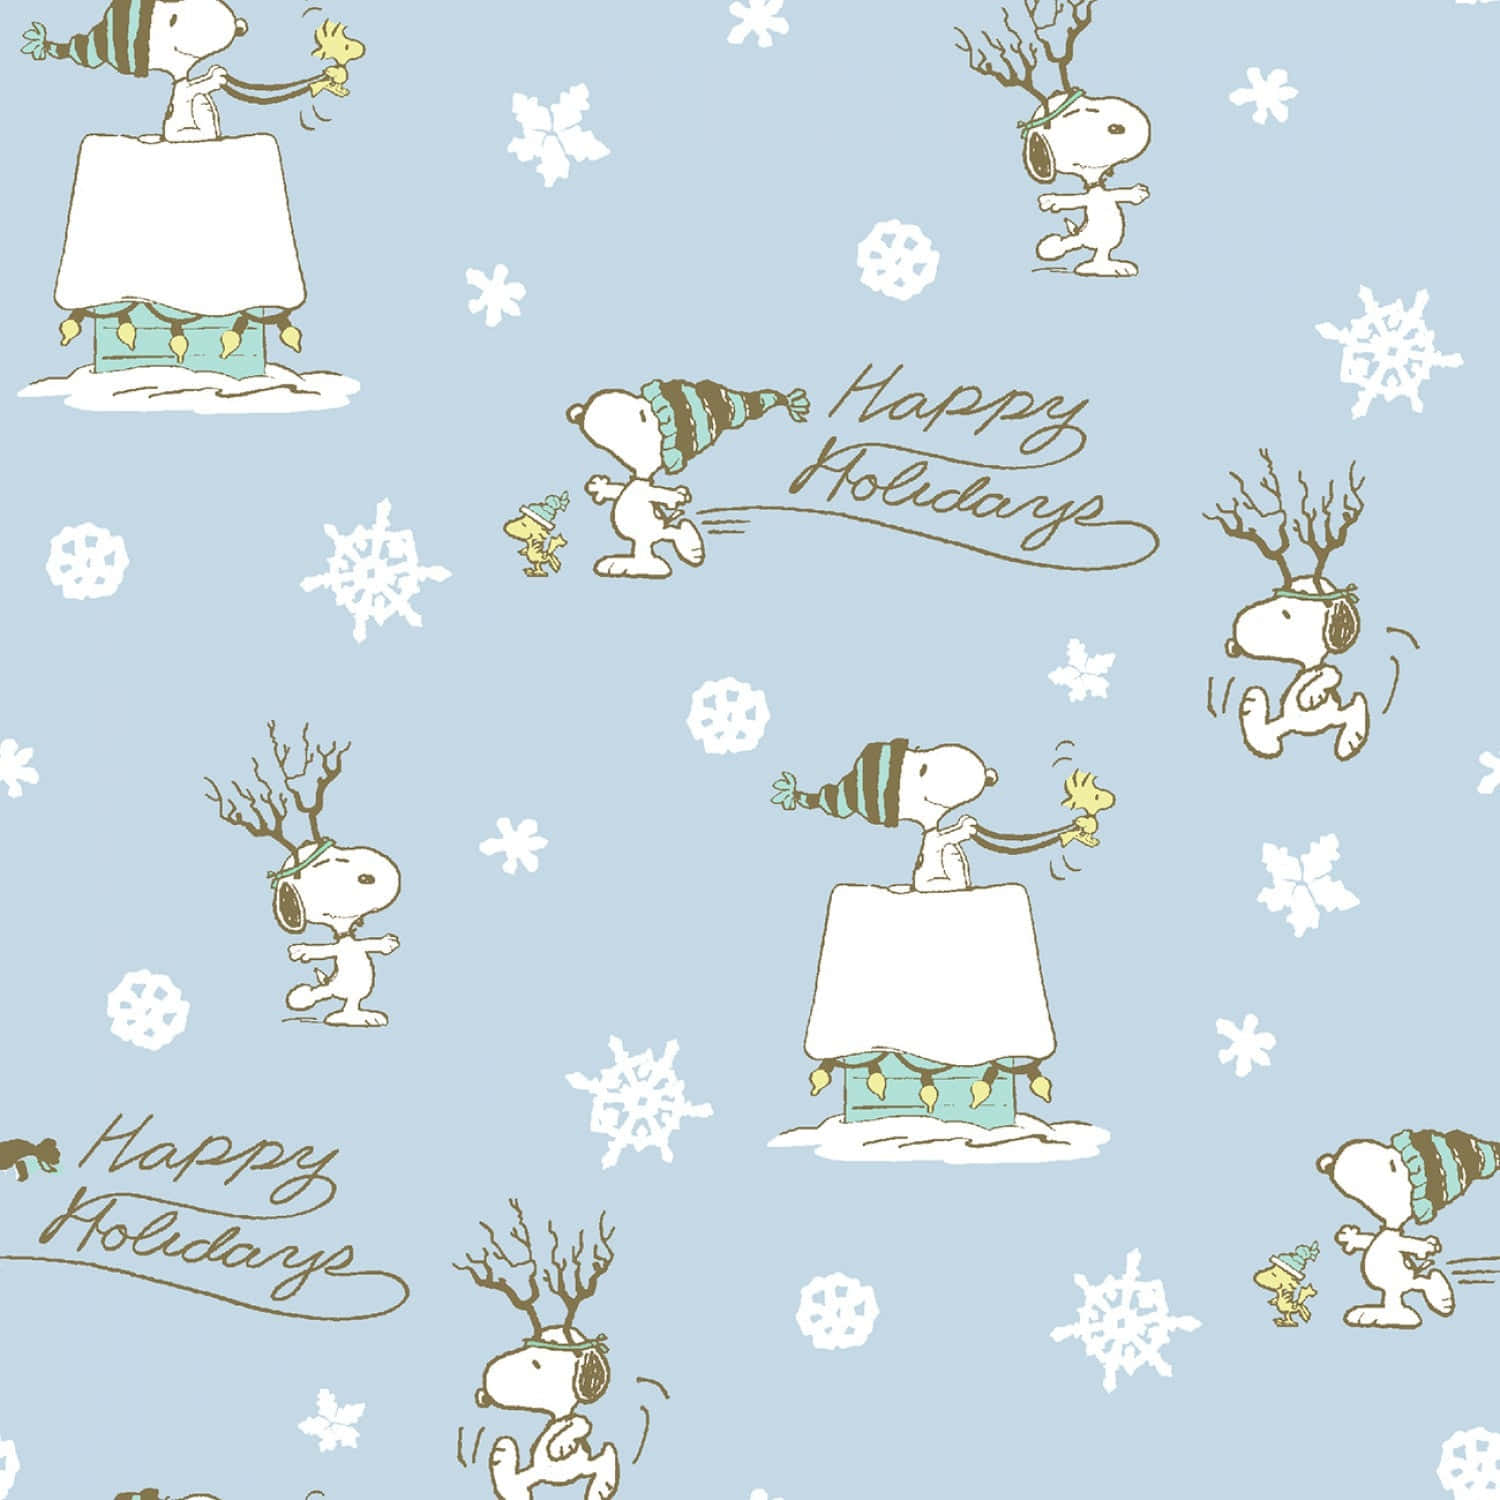 Celebrate The Winter Holidays With The Peanuts Gang Background